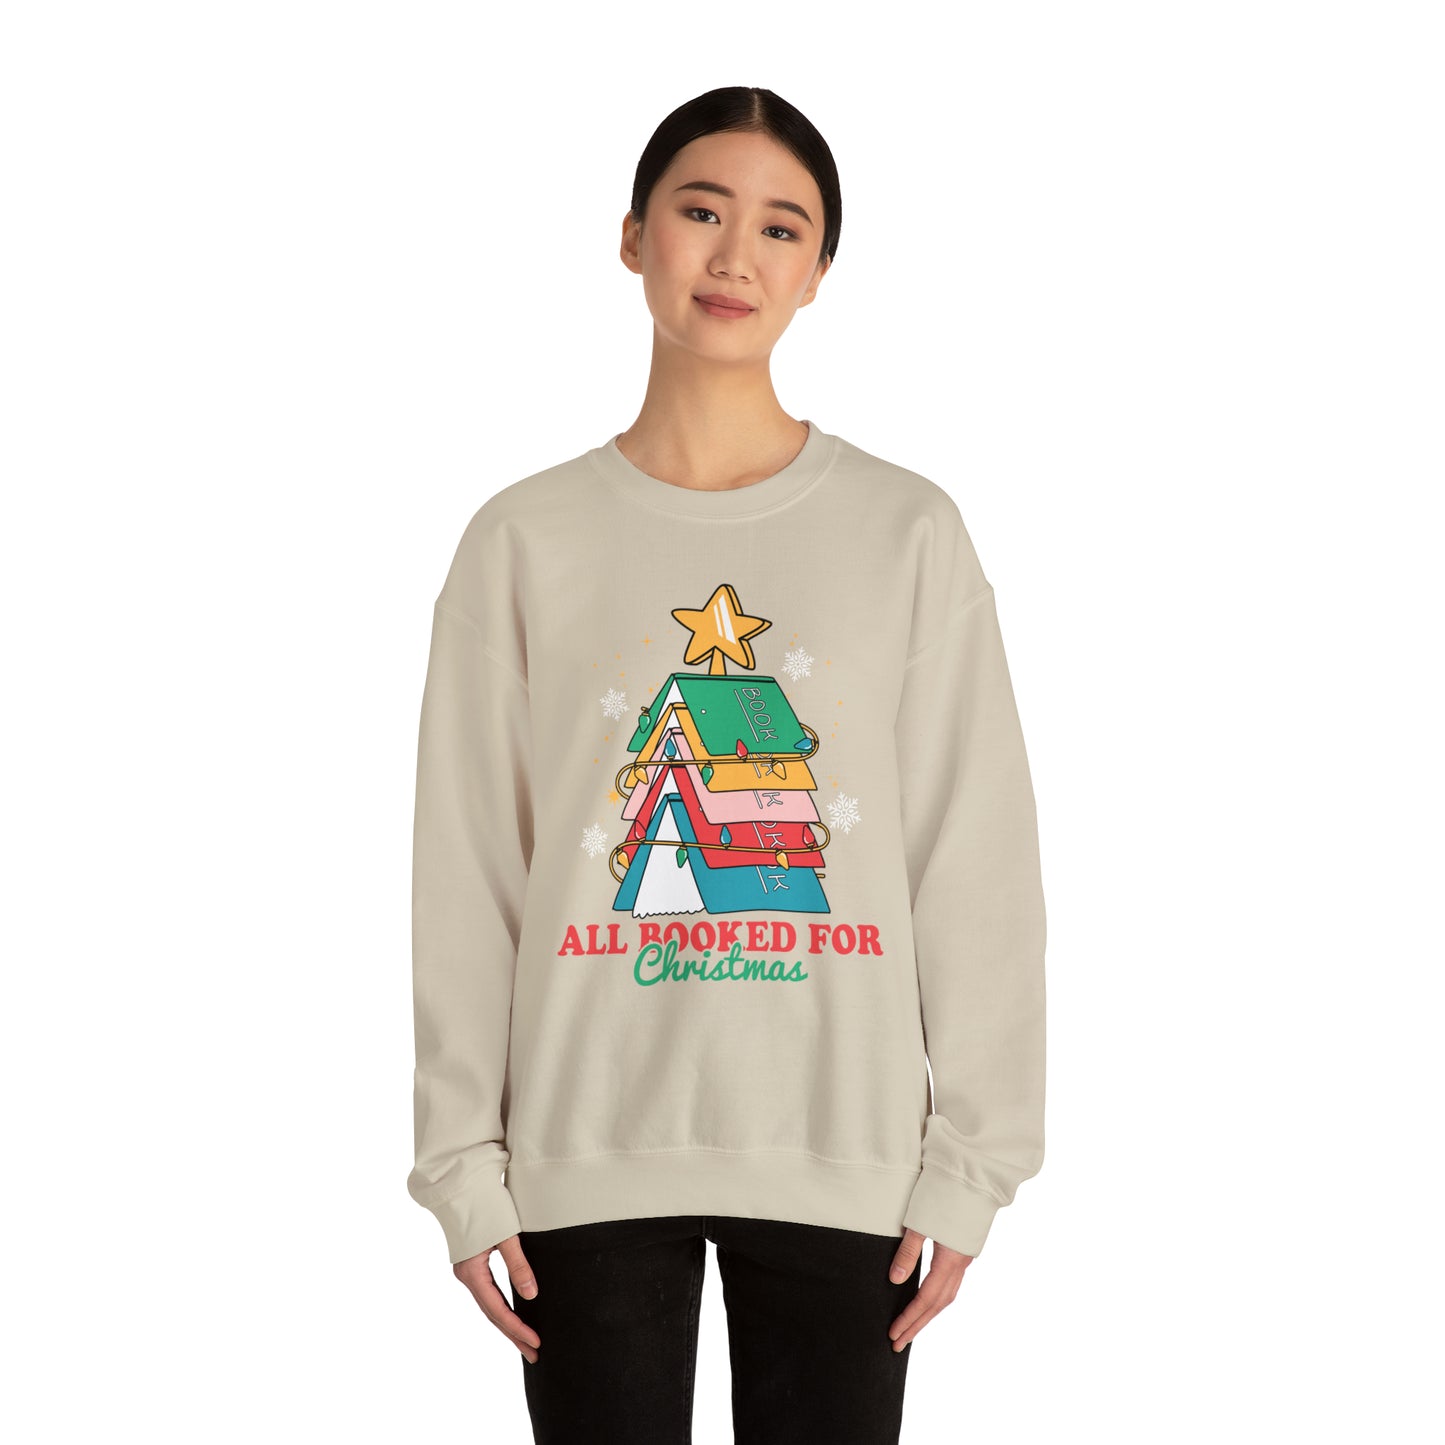 ALL BOOKED FOR CHRISTMAS Unisex Heavy Blend™ Crewneck Sweatshirt